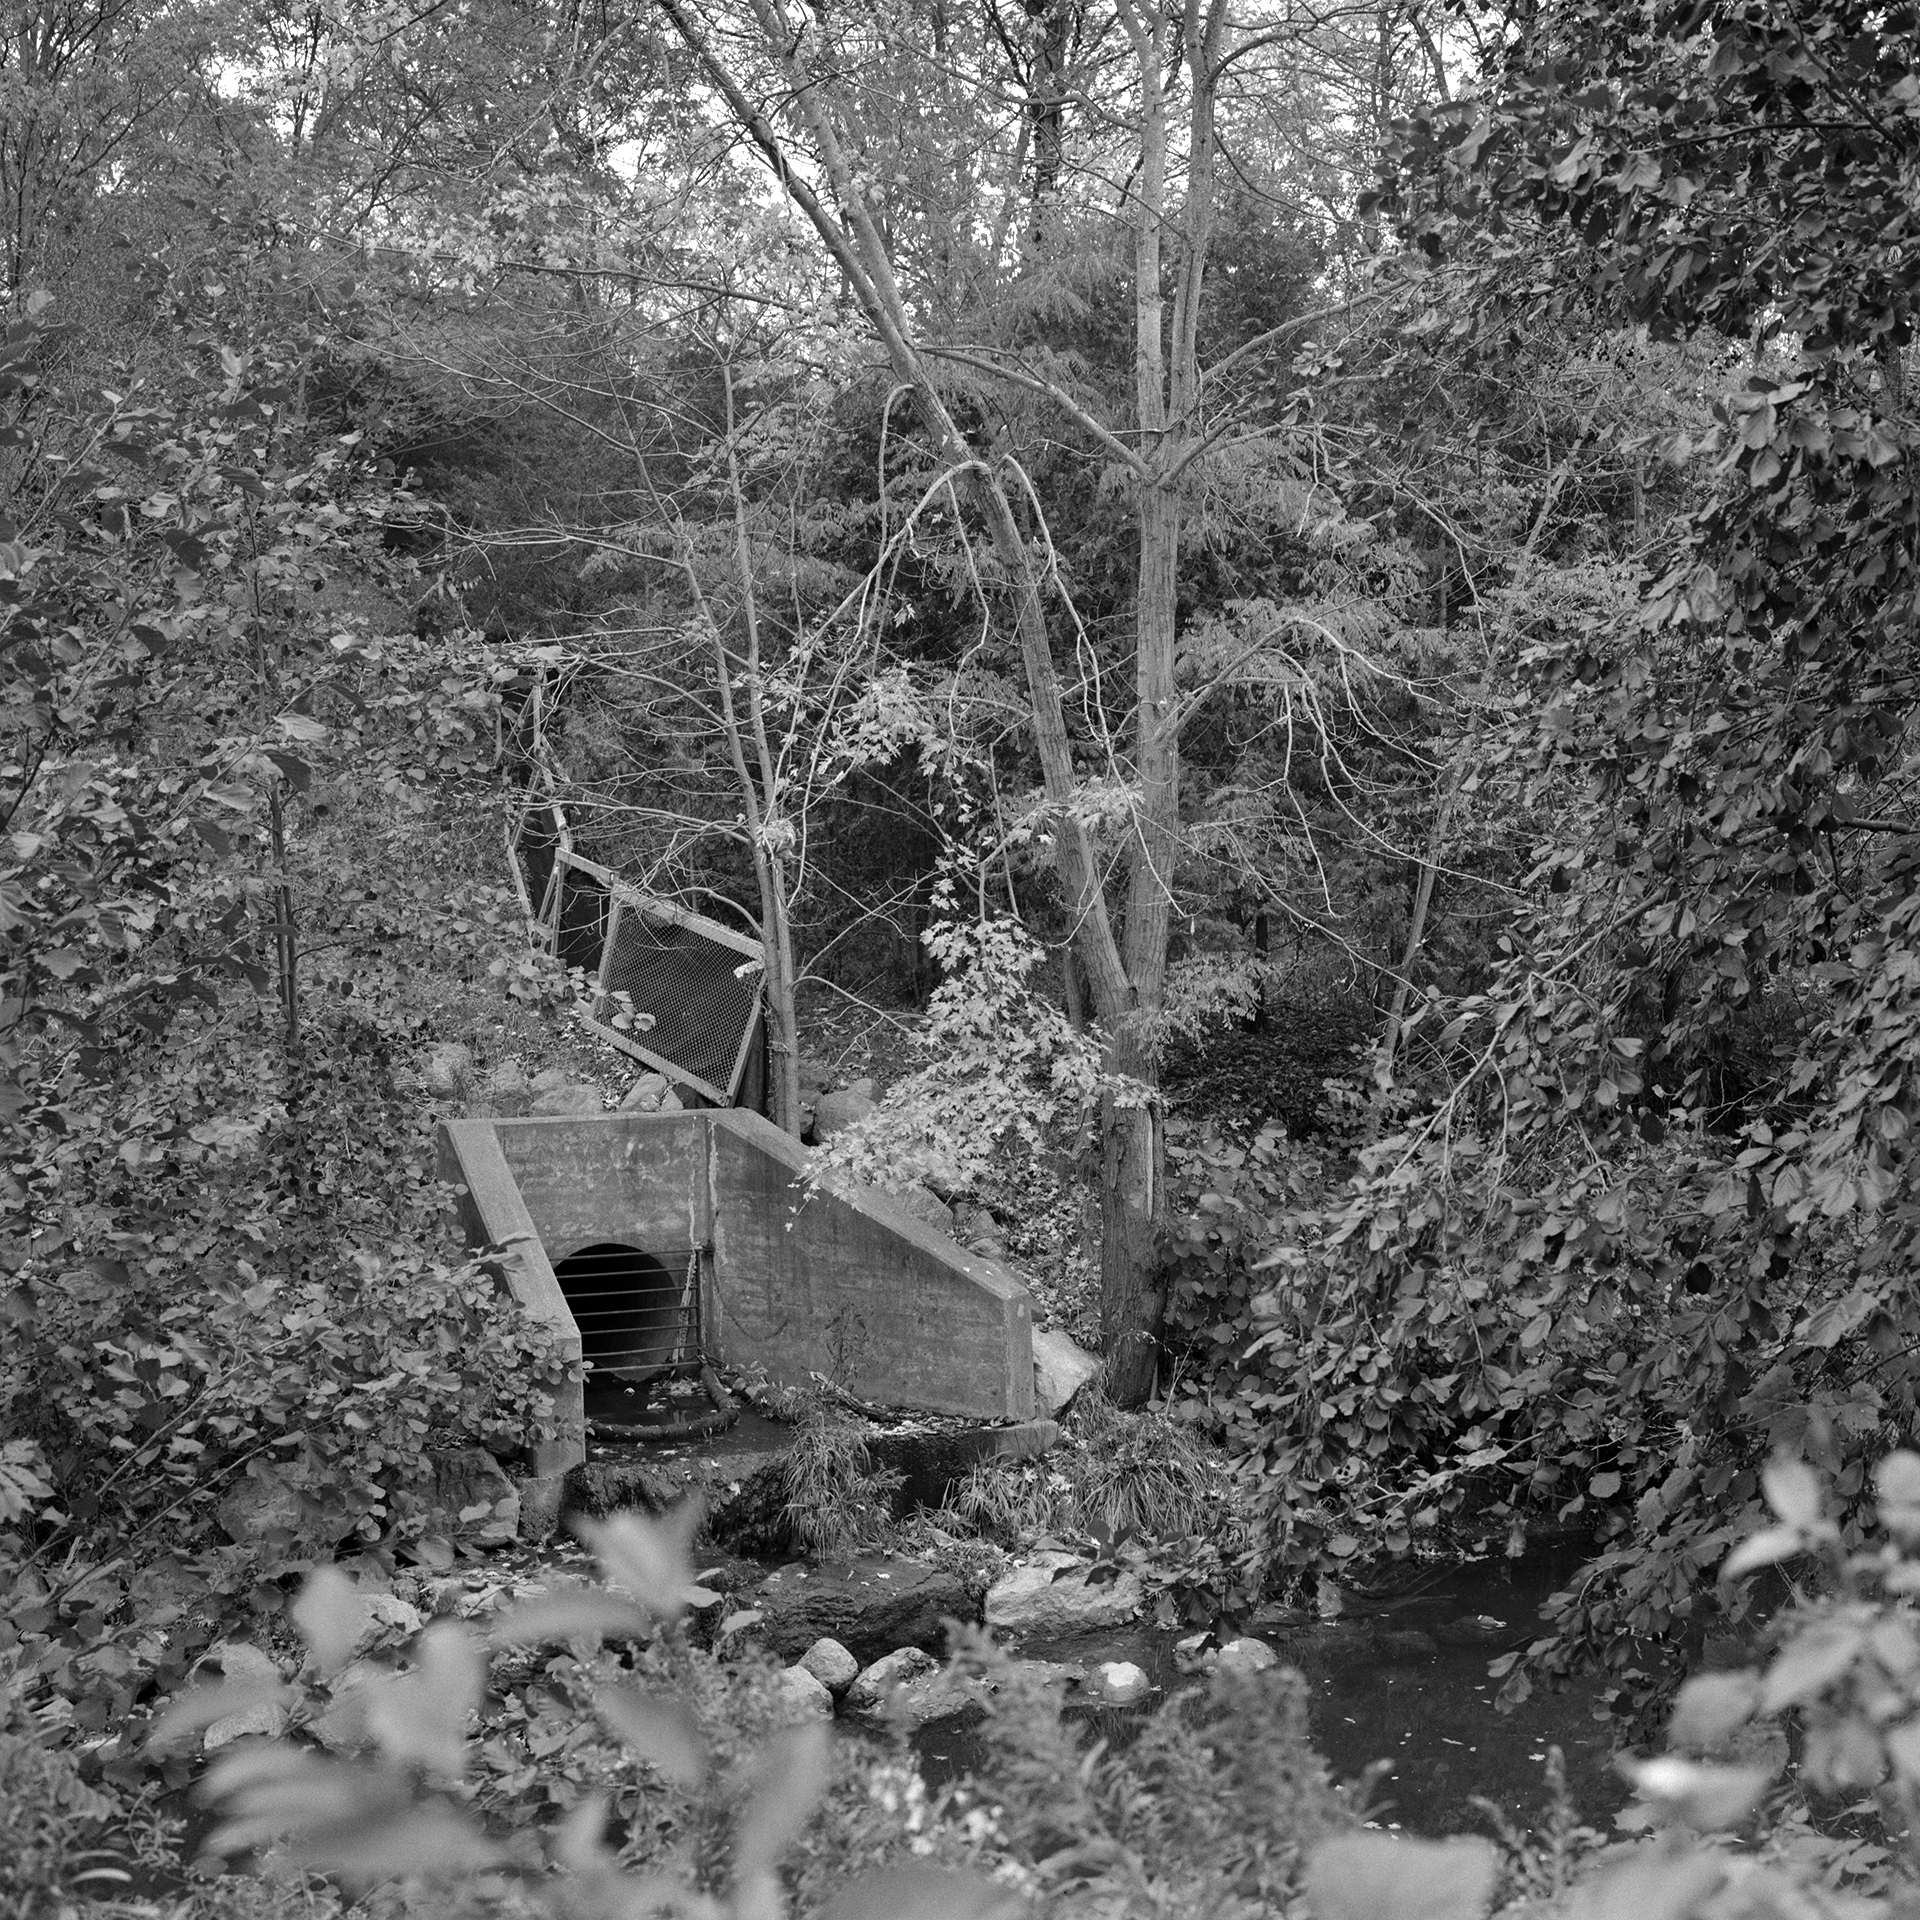 Where The River Runs # 12: A square black and white photograph looking out from forest cover. A river can be seen below, and a sewer protrudes from the other side, surrounded by trees. A wooden fence runs up the hillsides and disappears into the foliage.